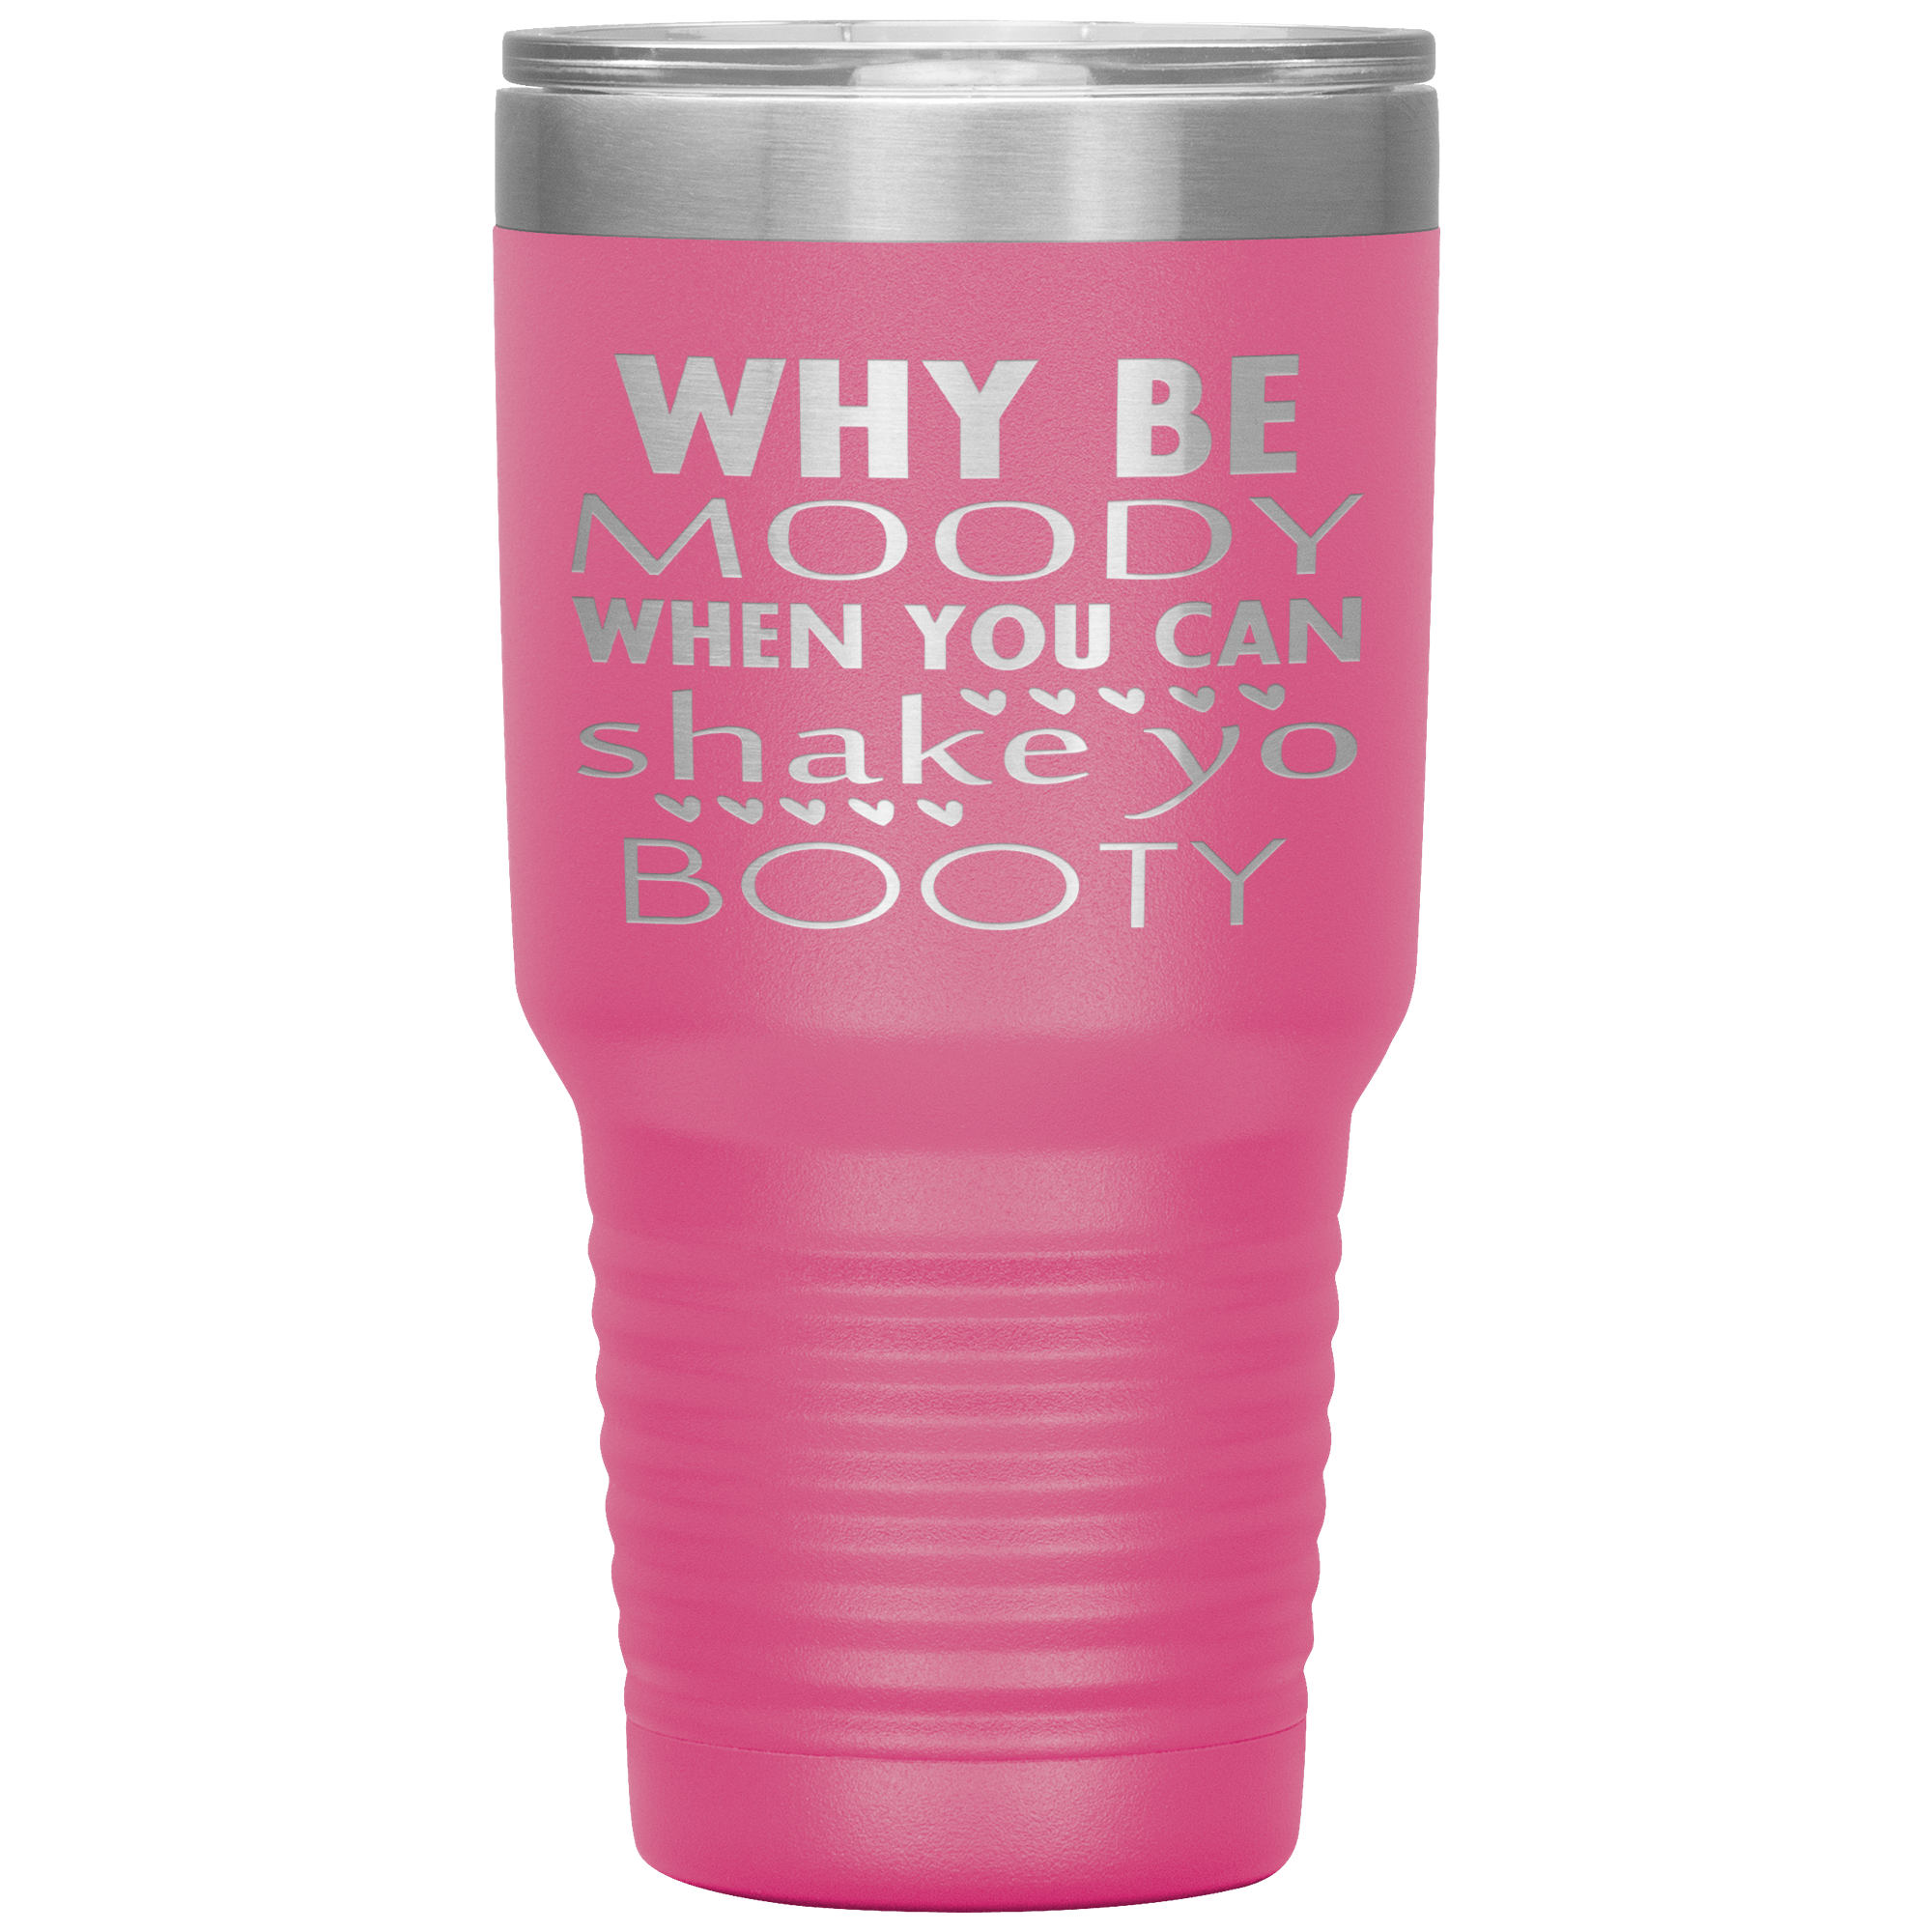 "WHY BE MOODY WHEN YOU CAN SHAKE YO BOOTY"TUMBLER